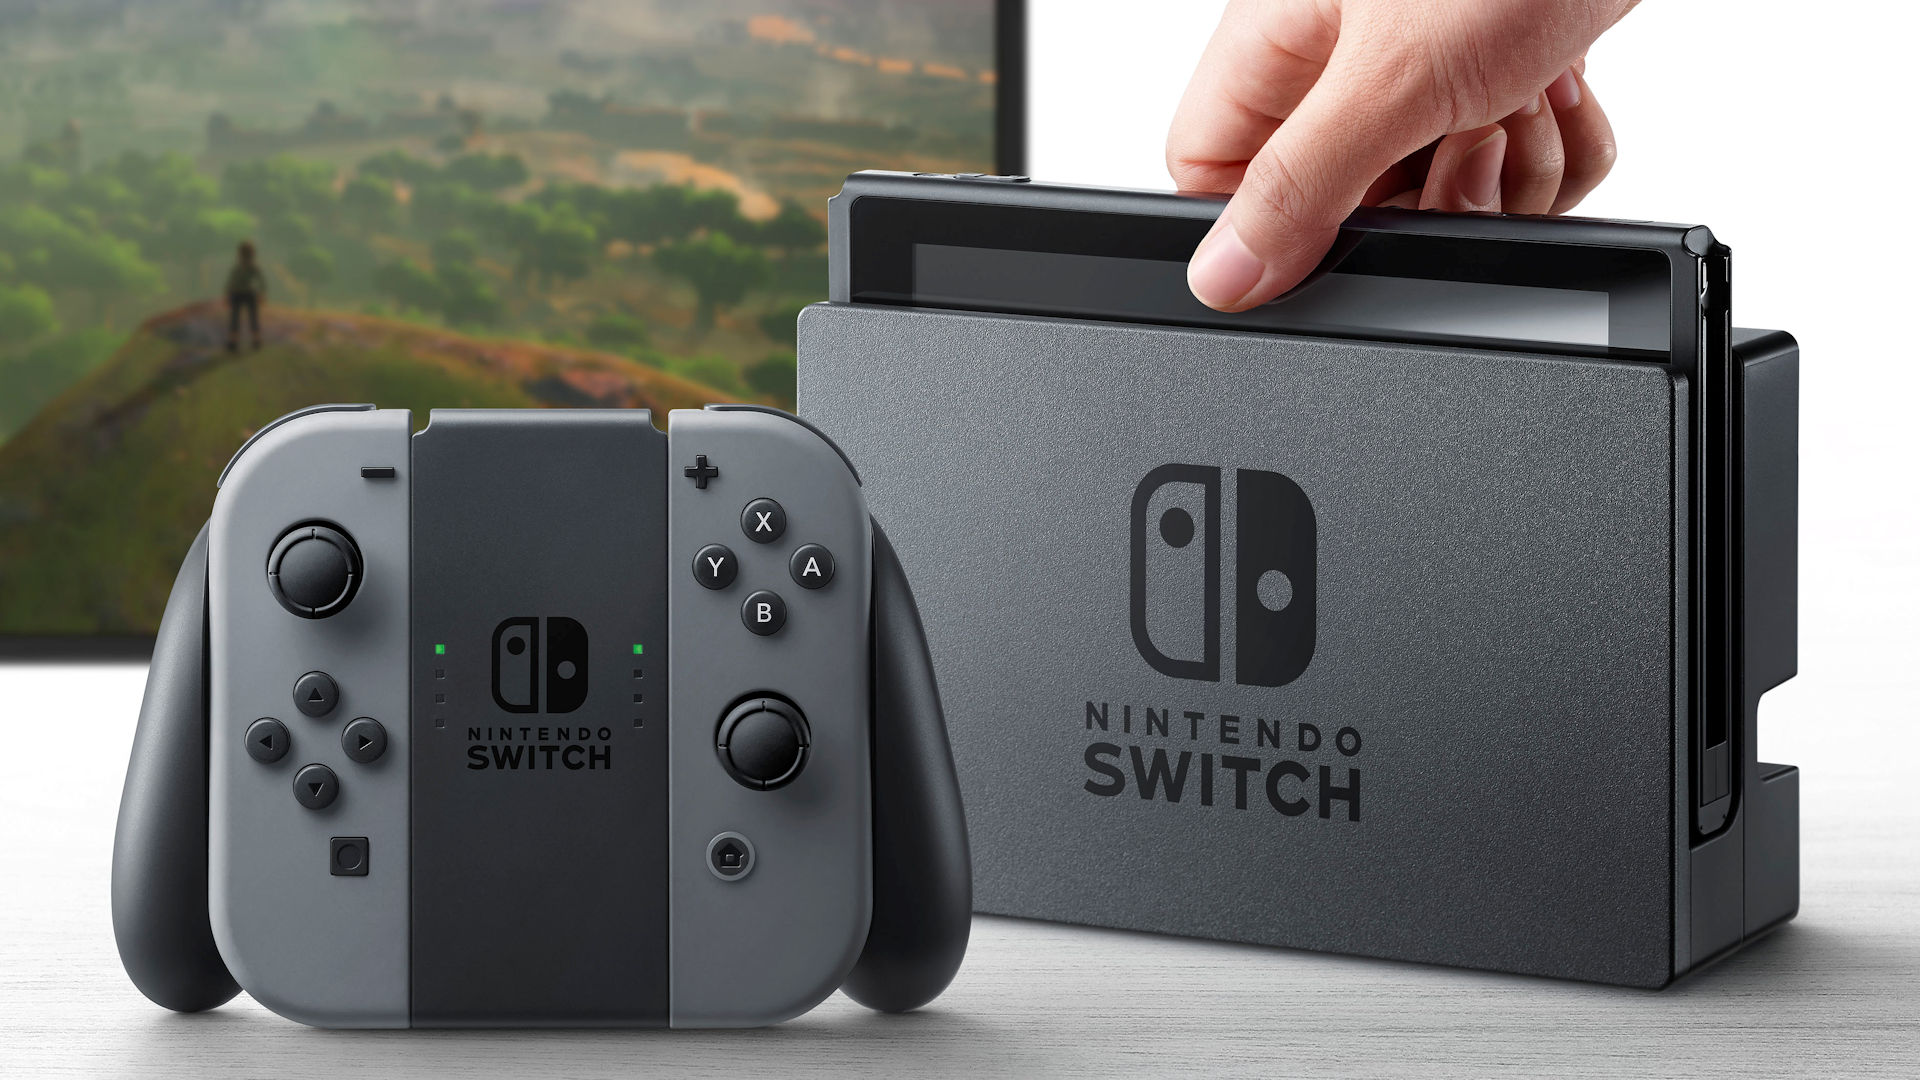 How to Start Developing for the Nintendo Switch | Dice.com Career Advice